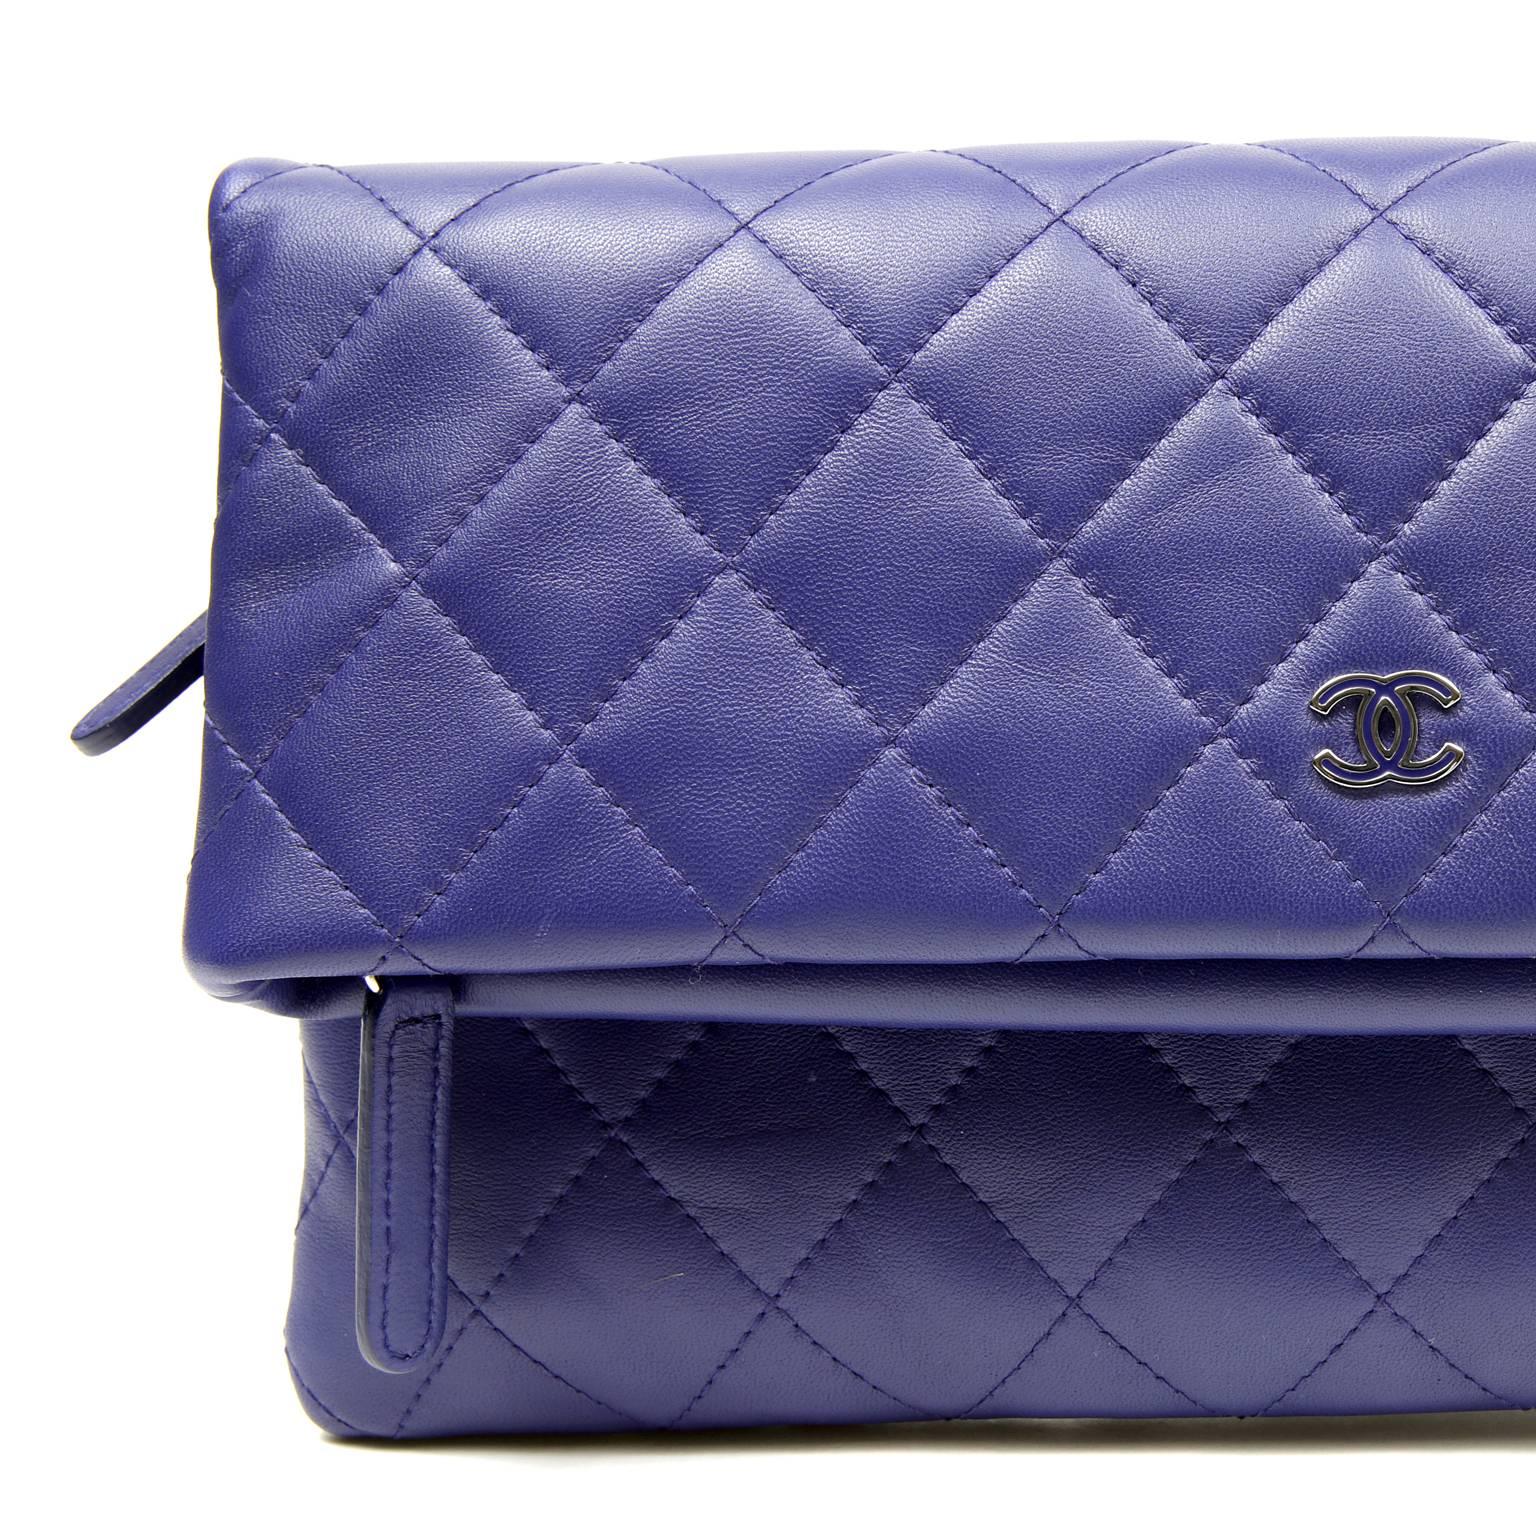 Women's Chanel Purple Quilted Leather Foldover Clutch